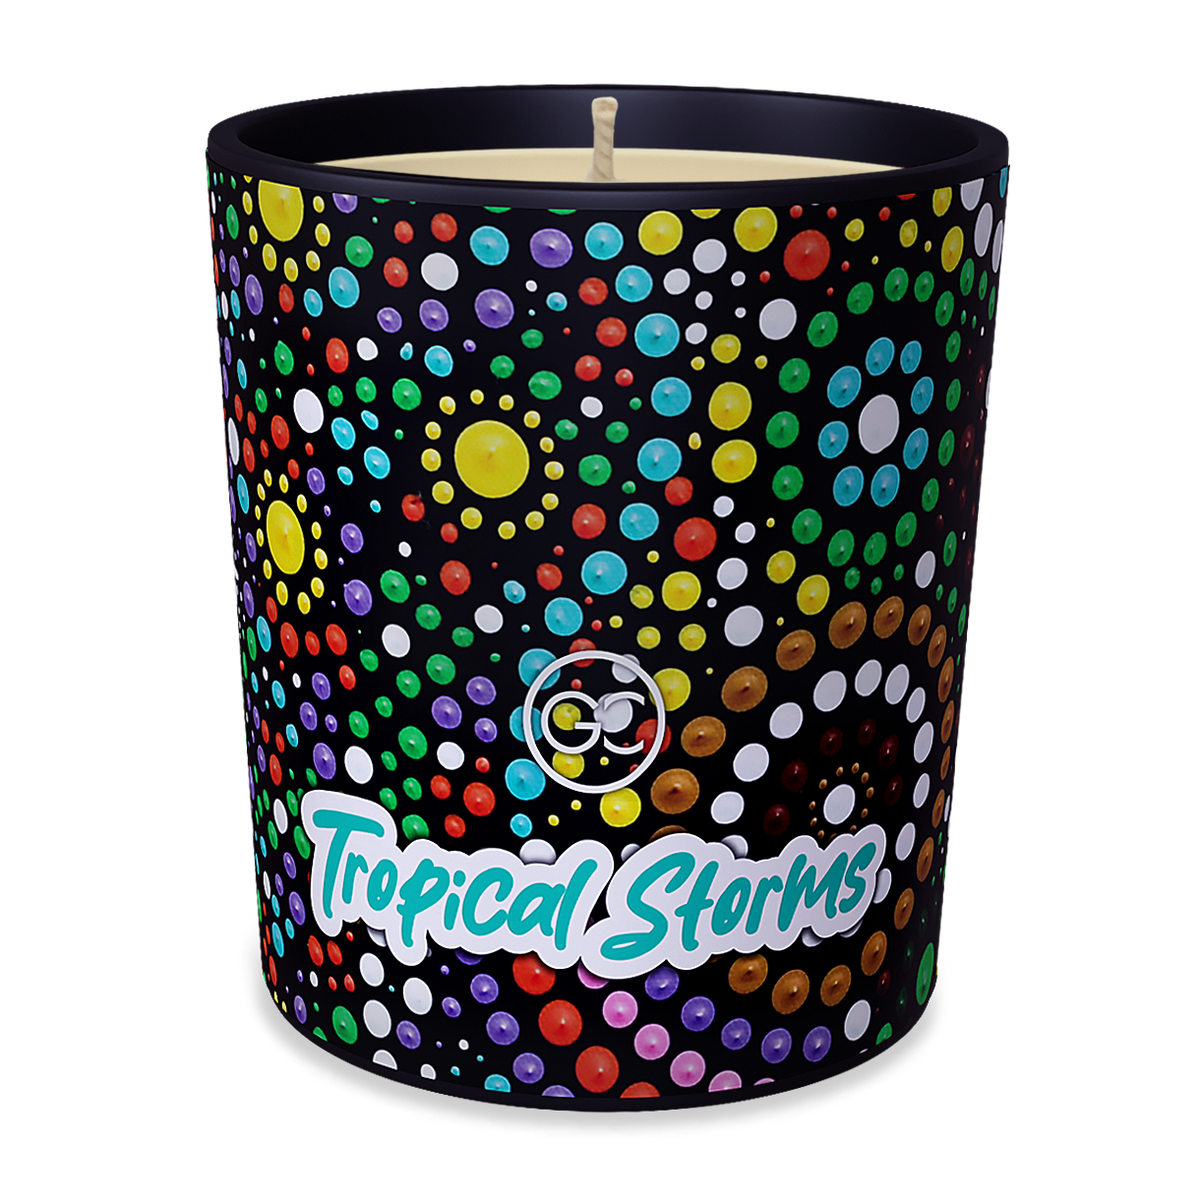 Tropical Storms - Orange and White Musk Scented Soy Paraffin Candle 40hr Burn